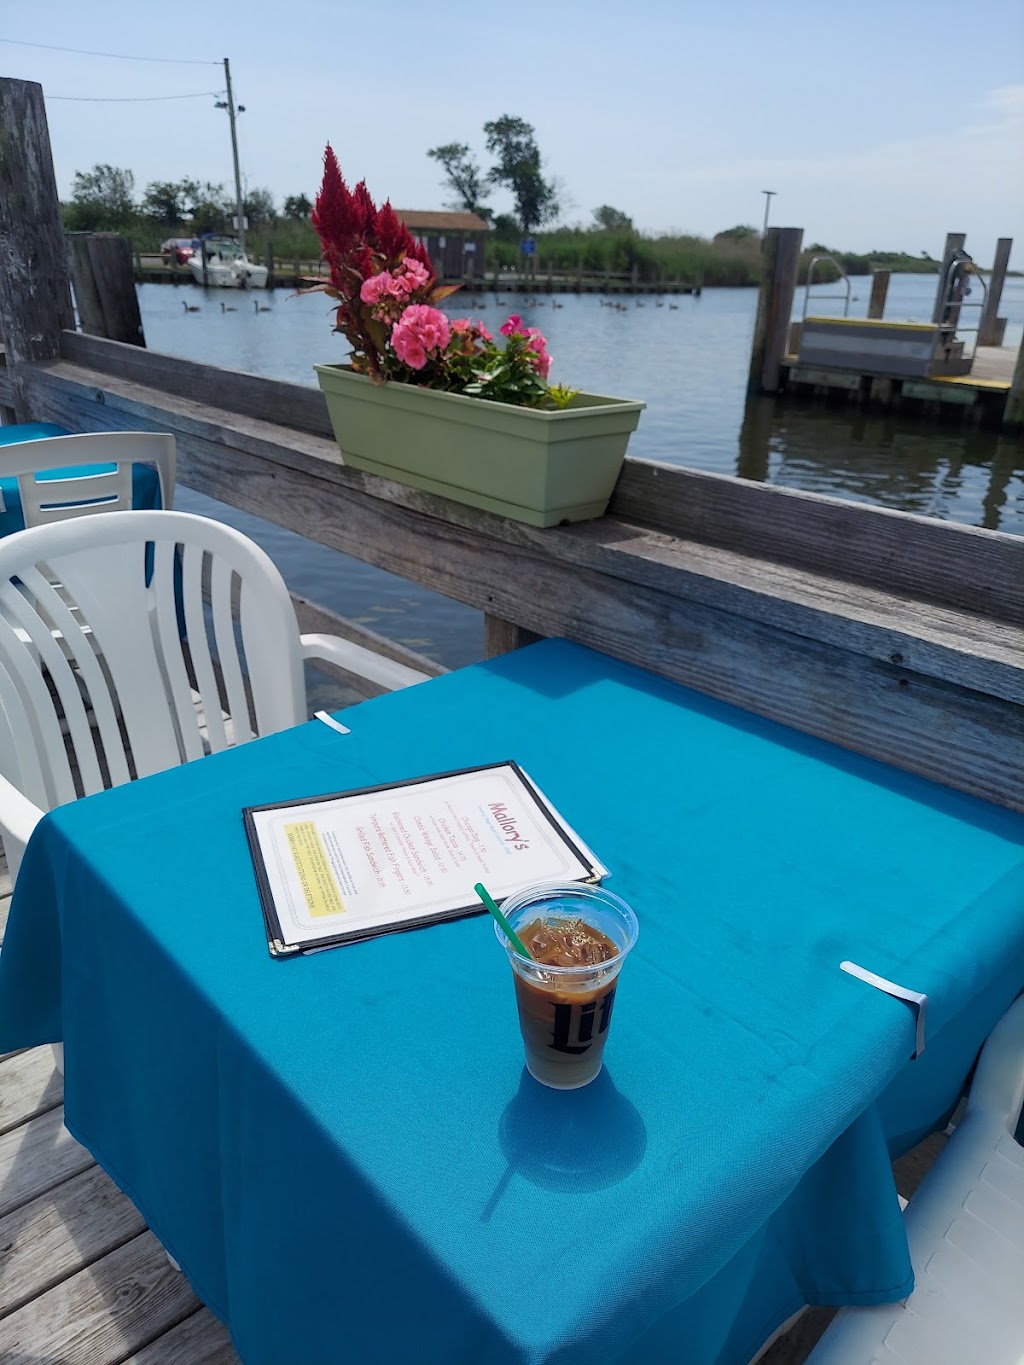 Mallory Square Restaurant and Bar | 41 River Rd, Sayville, NY 11782 | Phone: (631) 589-8628